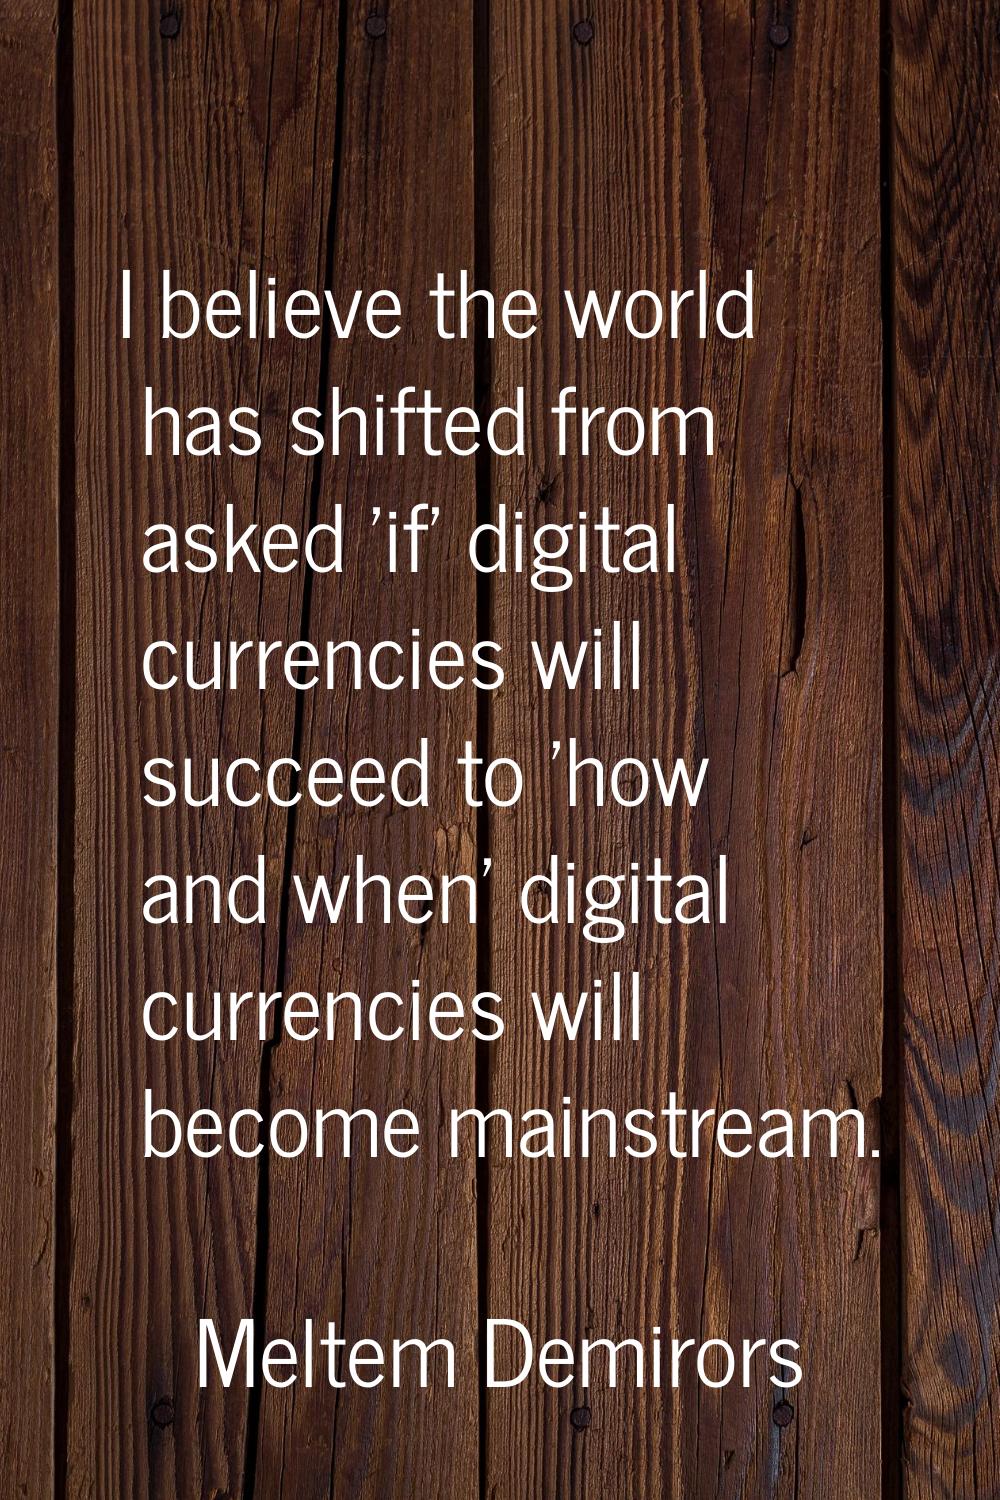 I believe the world has shifted from asked 'if' digital currencies will succeed to 'how and when' d